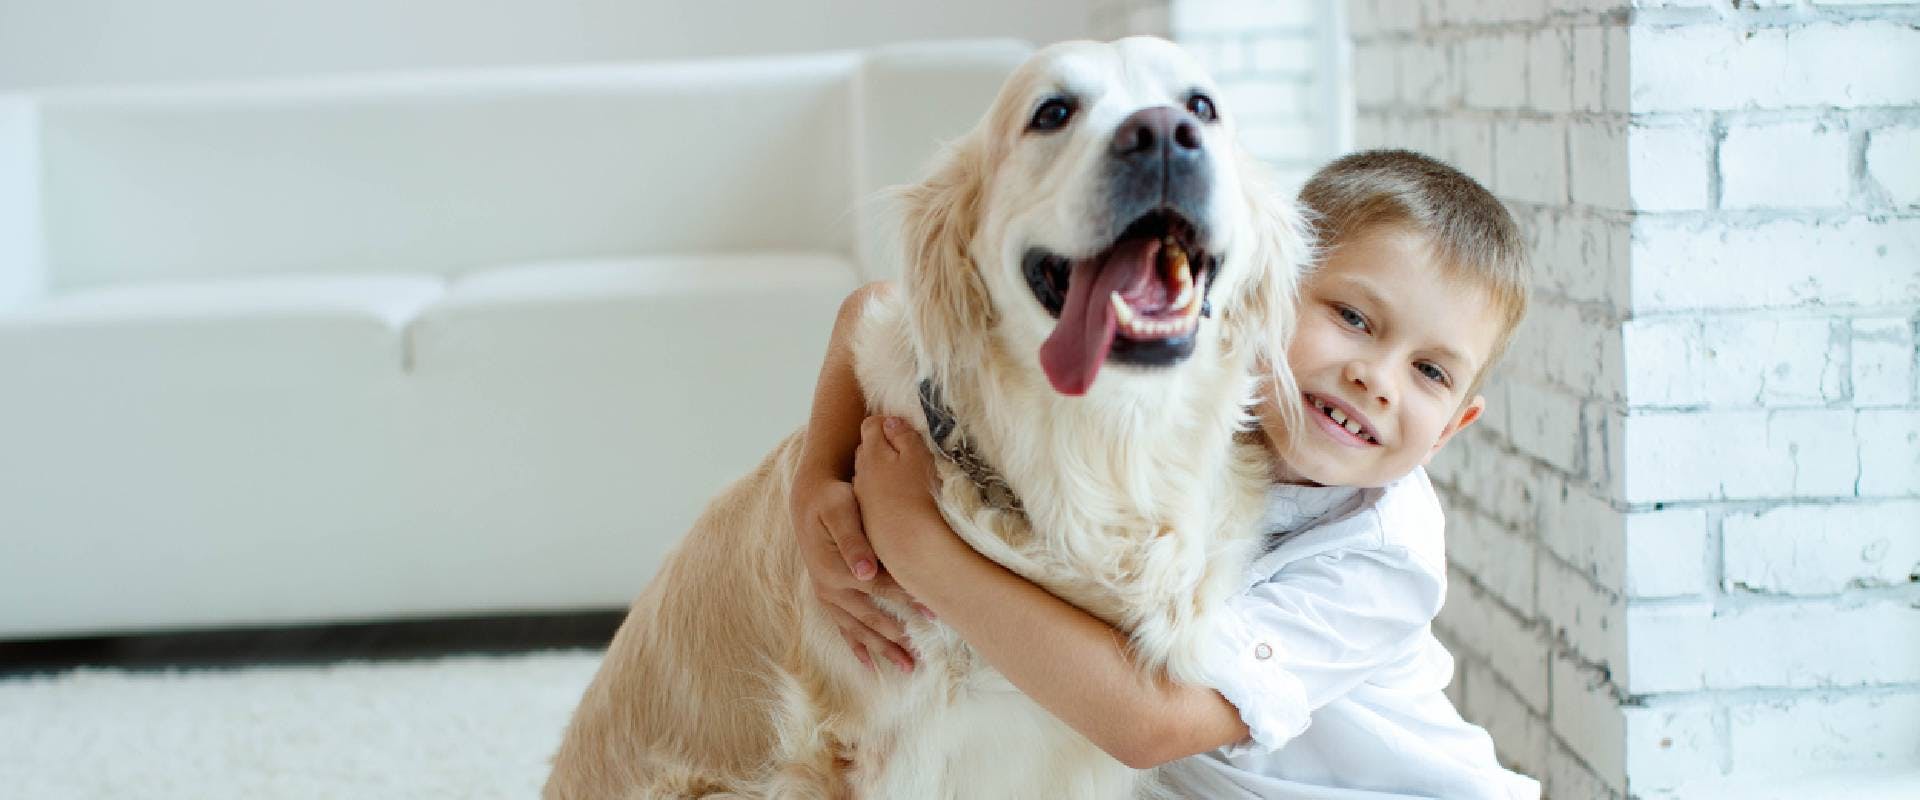 Golden Retriever and a young boy embracing